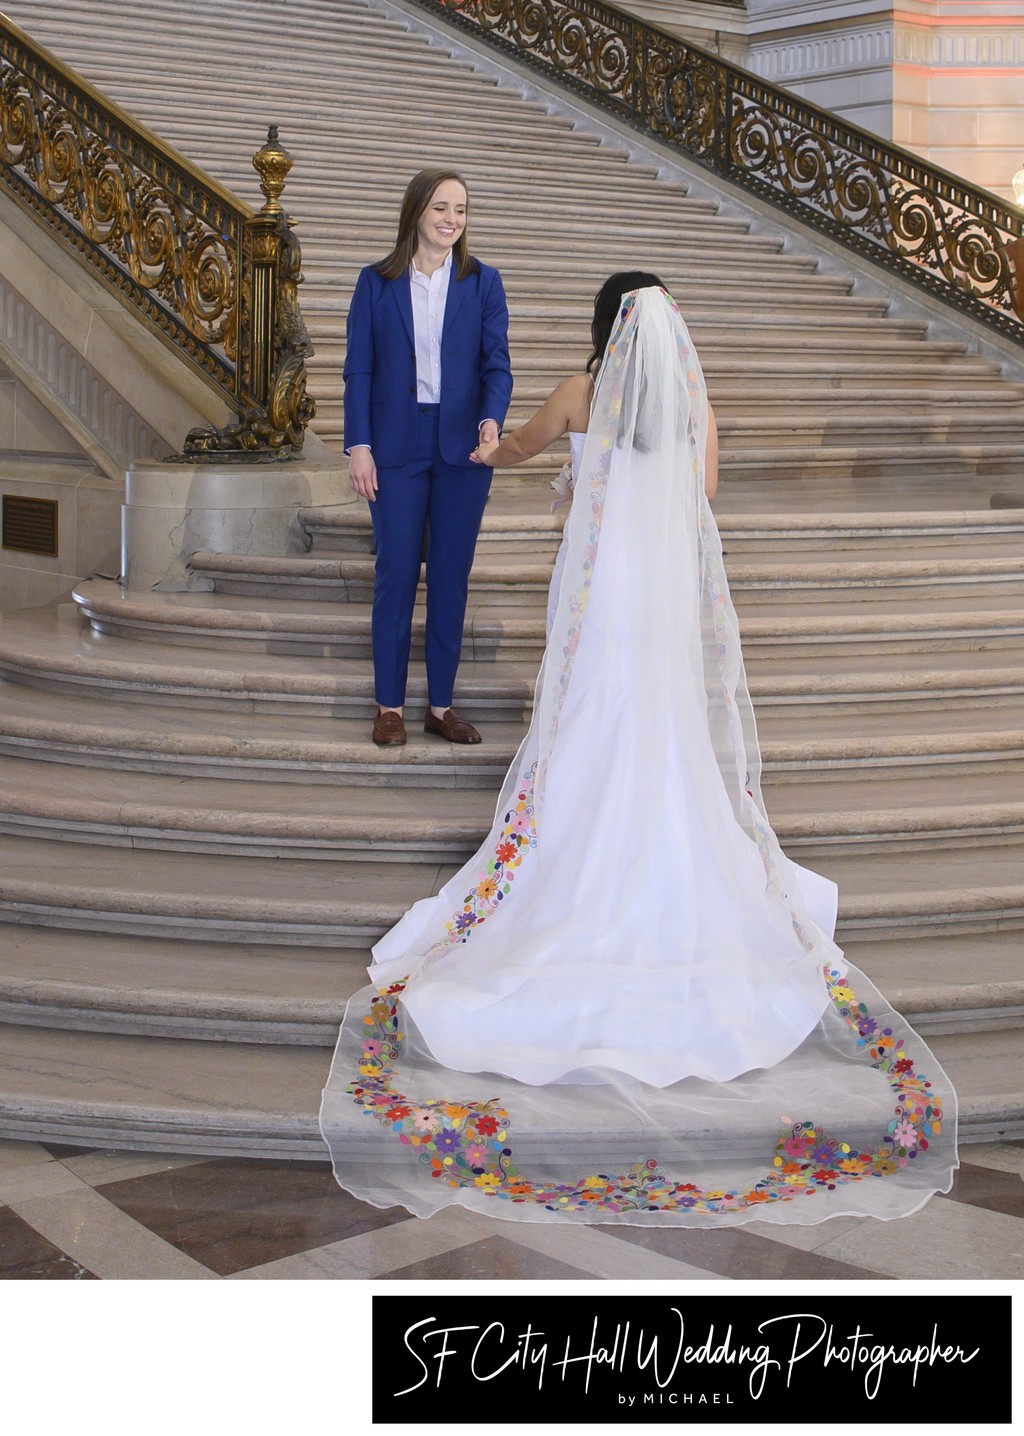 Beautiful Veil on Wedding Gown at San Francisco city hall - Photography